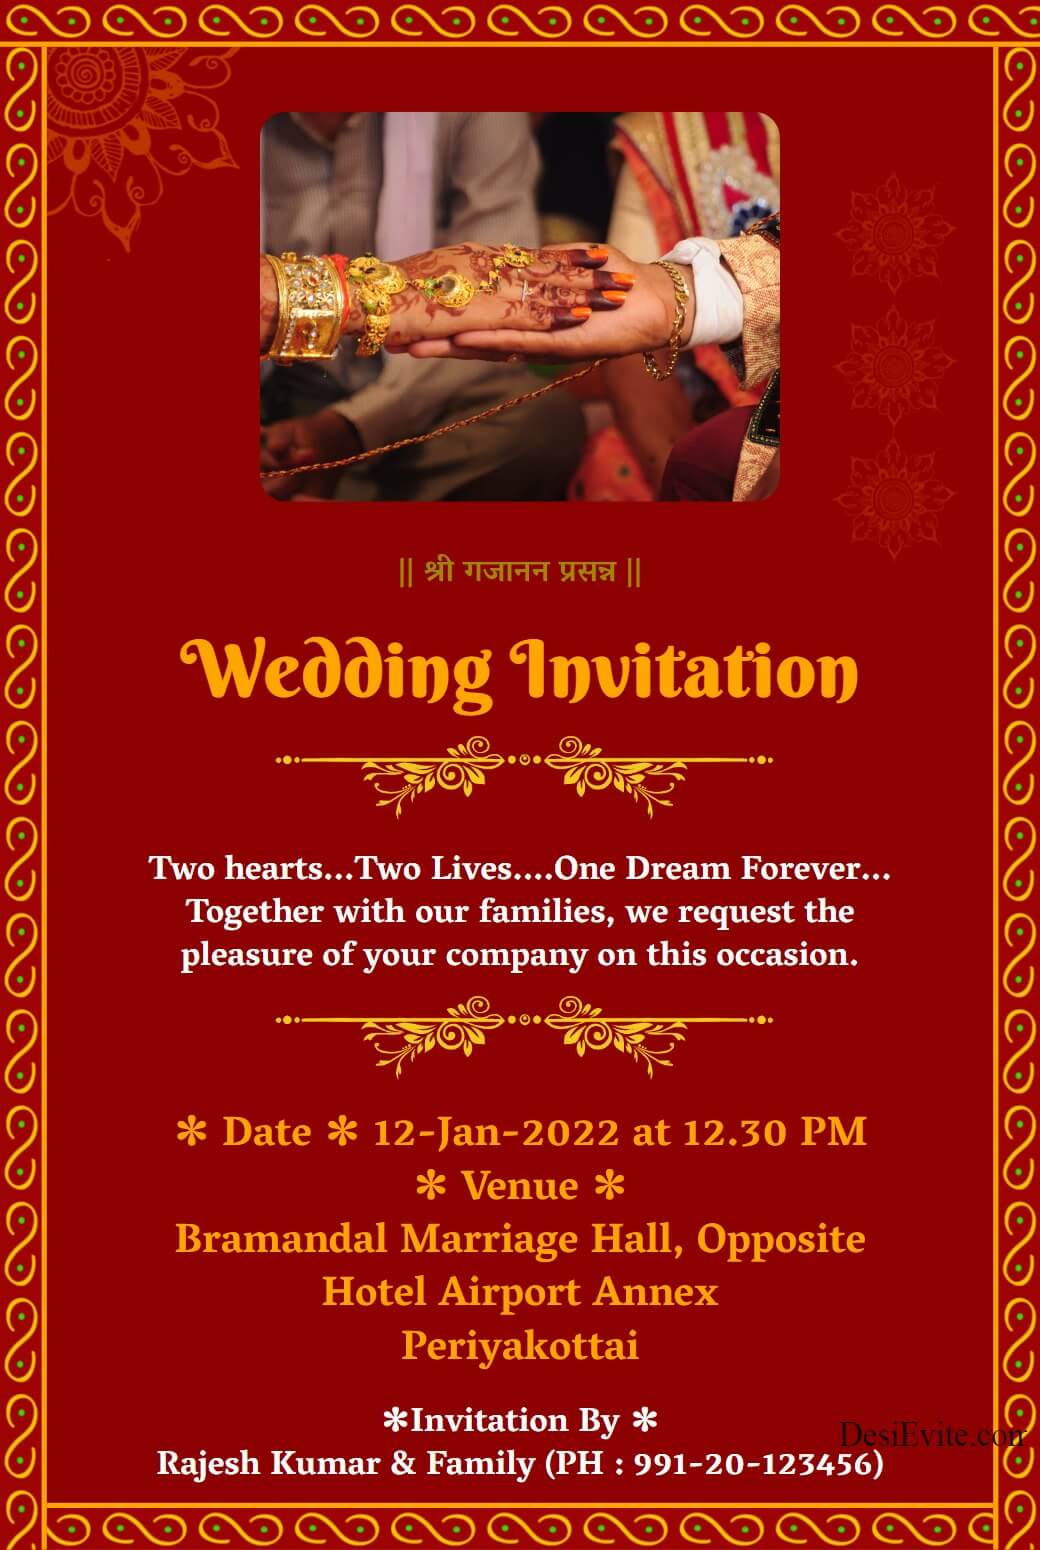 traditional wedding ecard red background with border